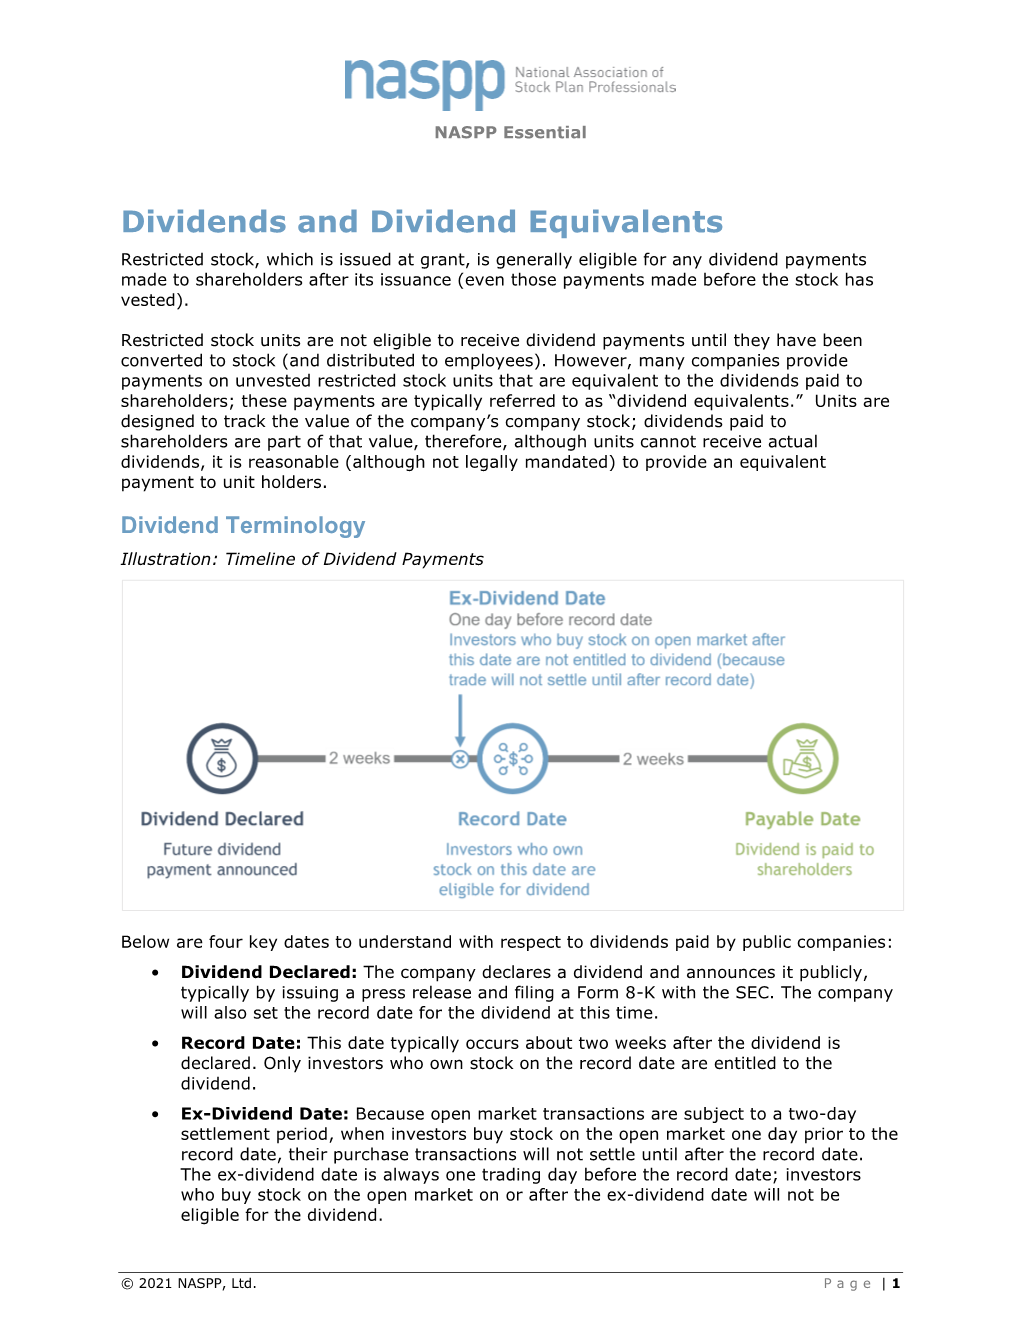 Dividends and Dividend Equivalents